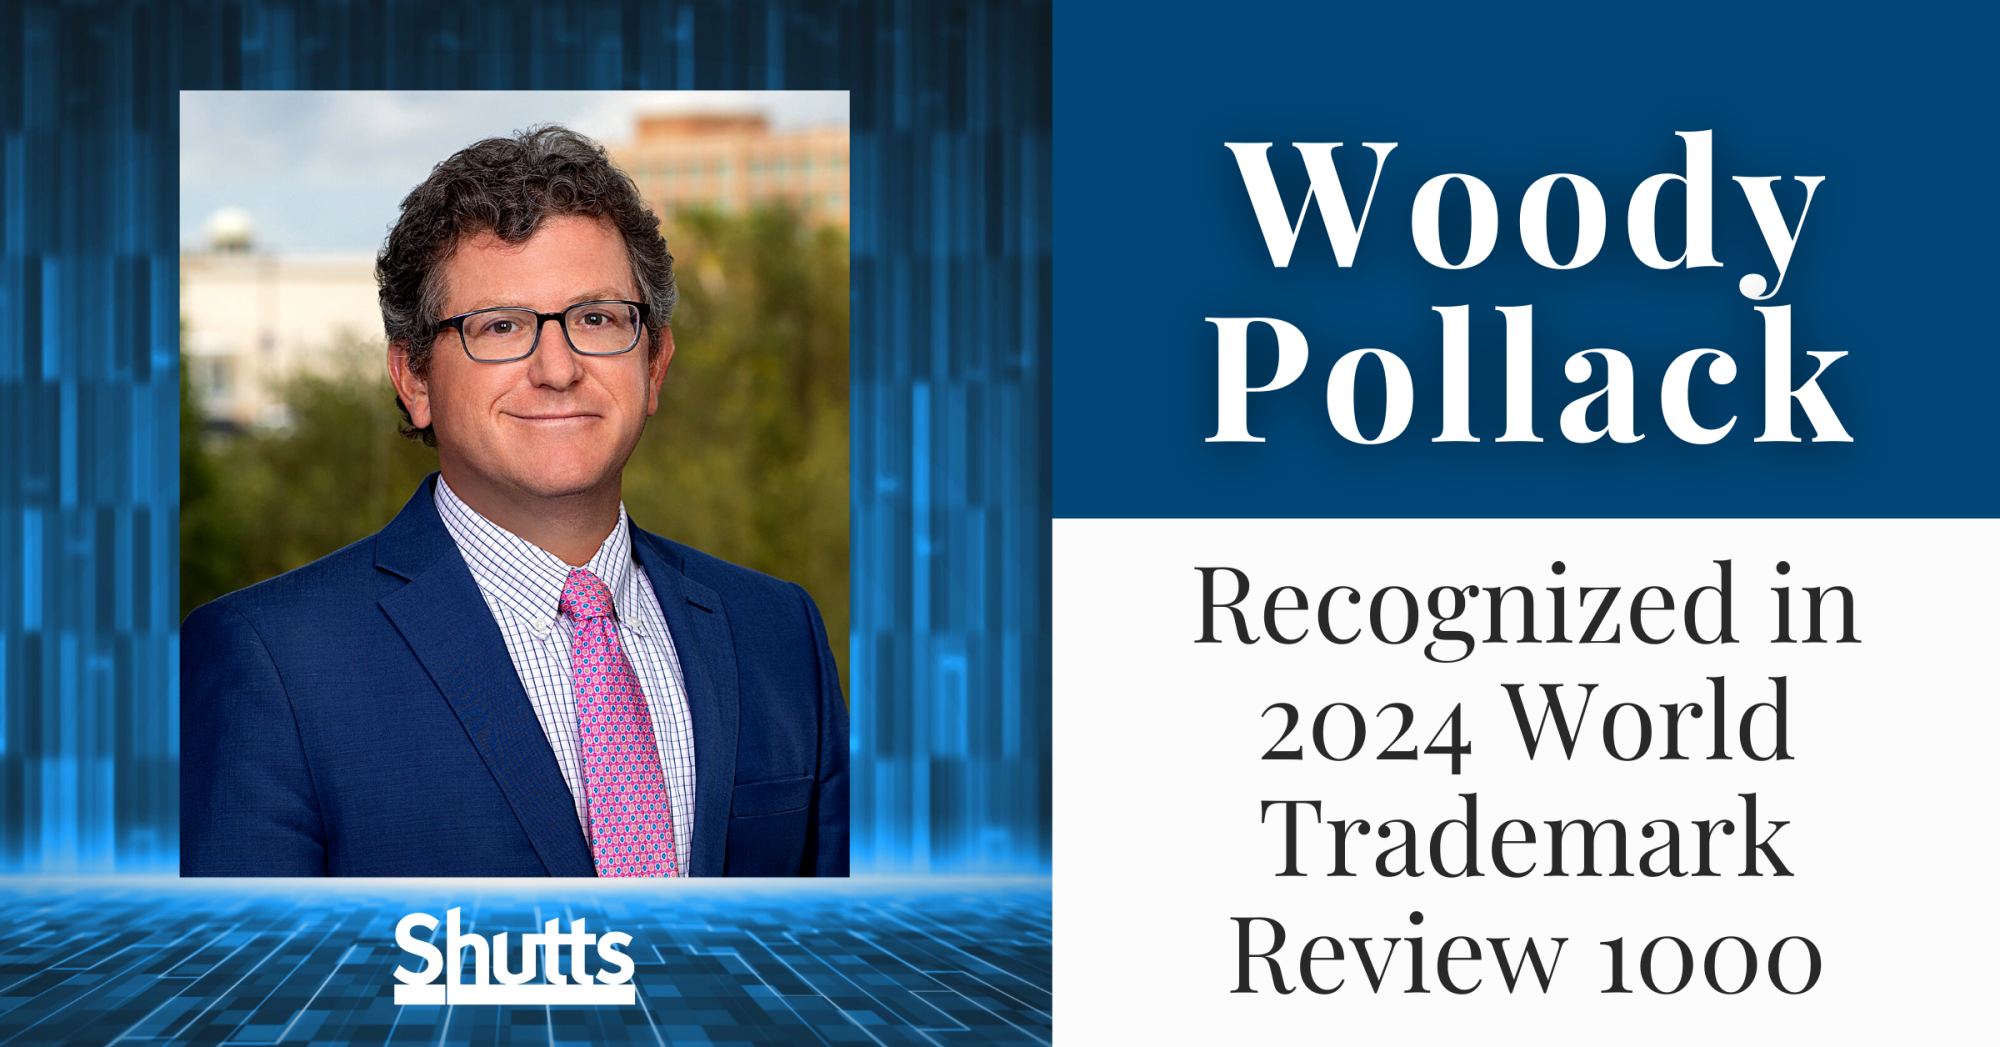 Woody Pollack Recognized in 2024 World Trademark Review 1000